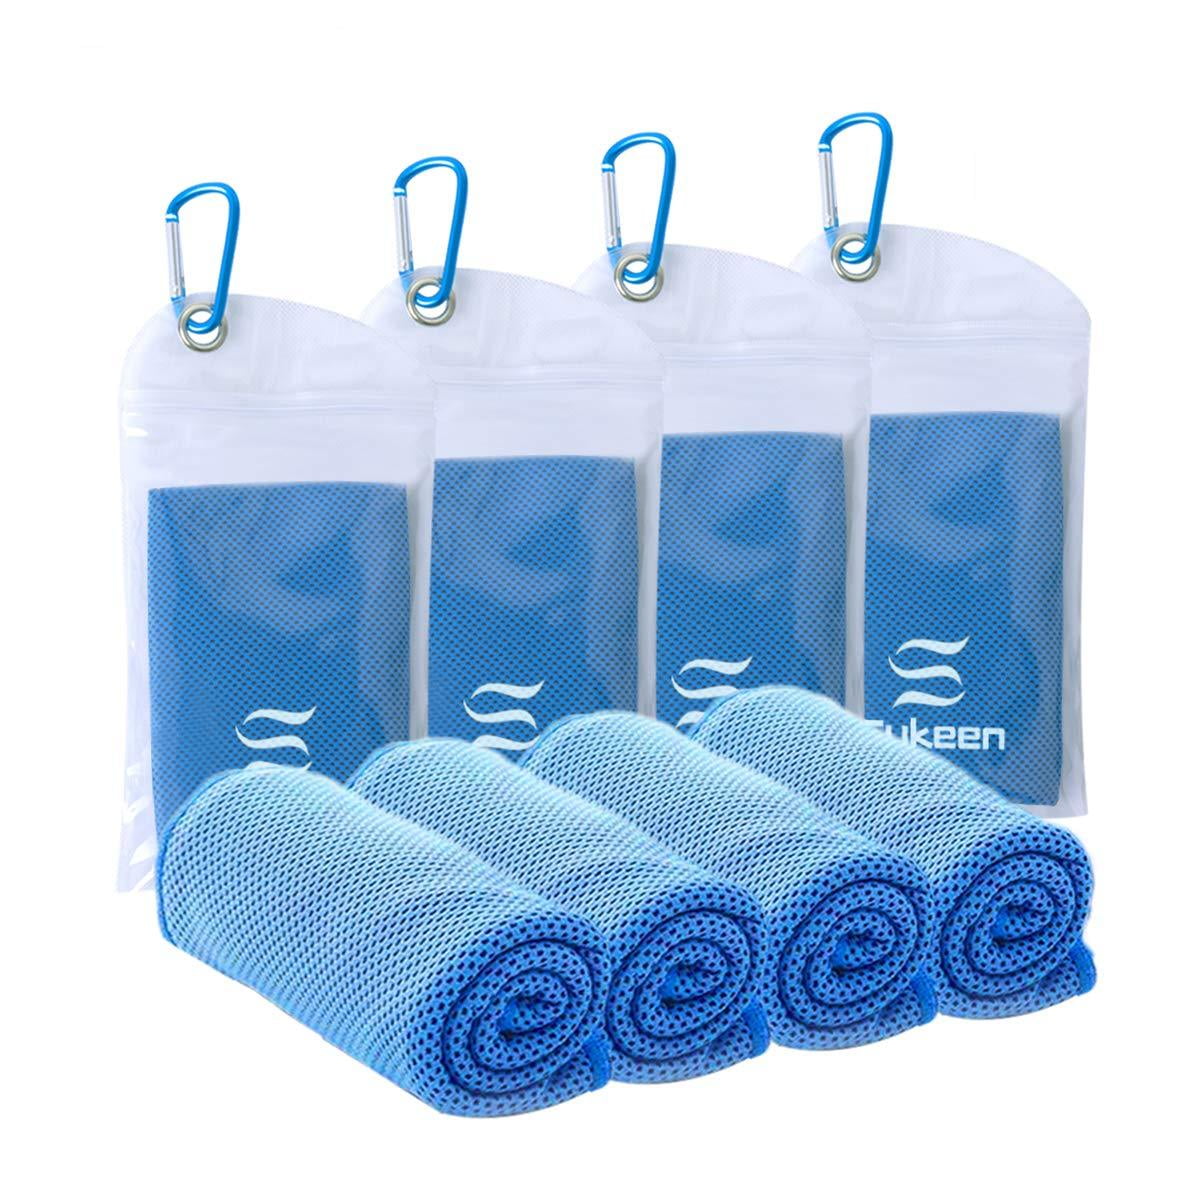 Blue 12“x40”）Ice Towel for Men,Microfibre,Soft Breathable Instant Towel for Sport,Cycling,Yoga, Golf, Gym, Camping, Running,Workout Skyzzie Cooling Towel for Neck